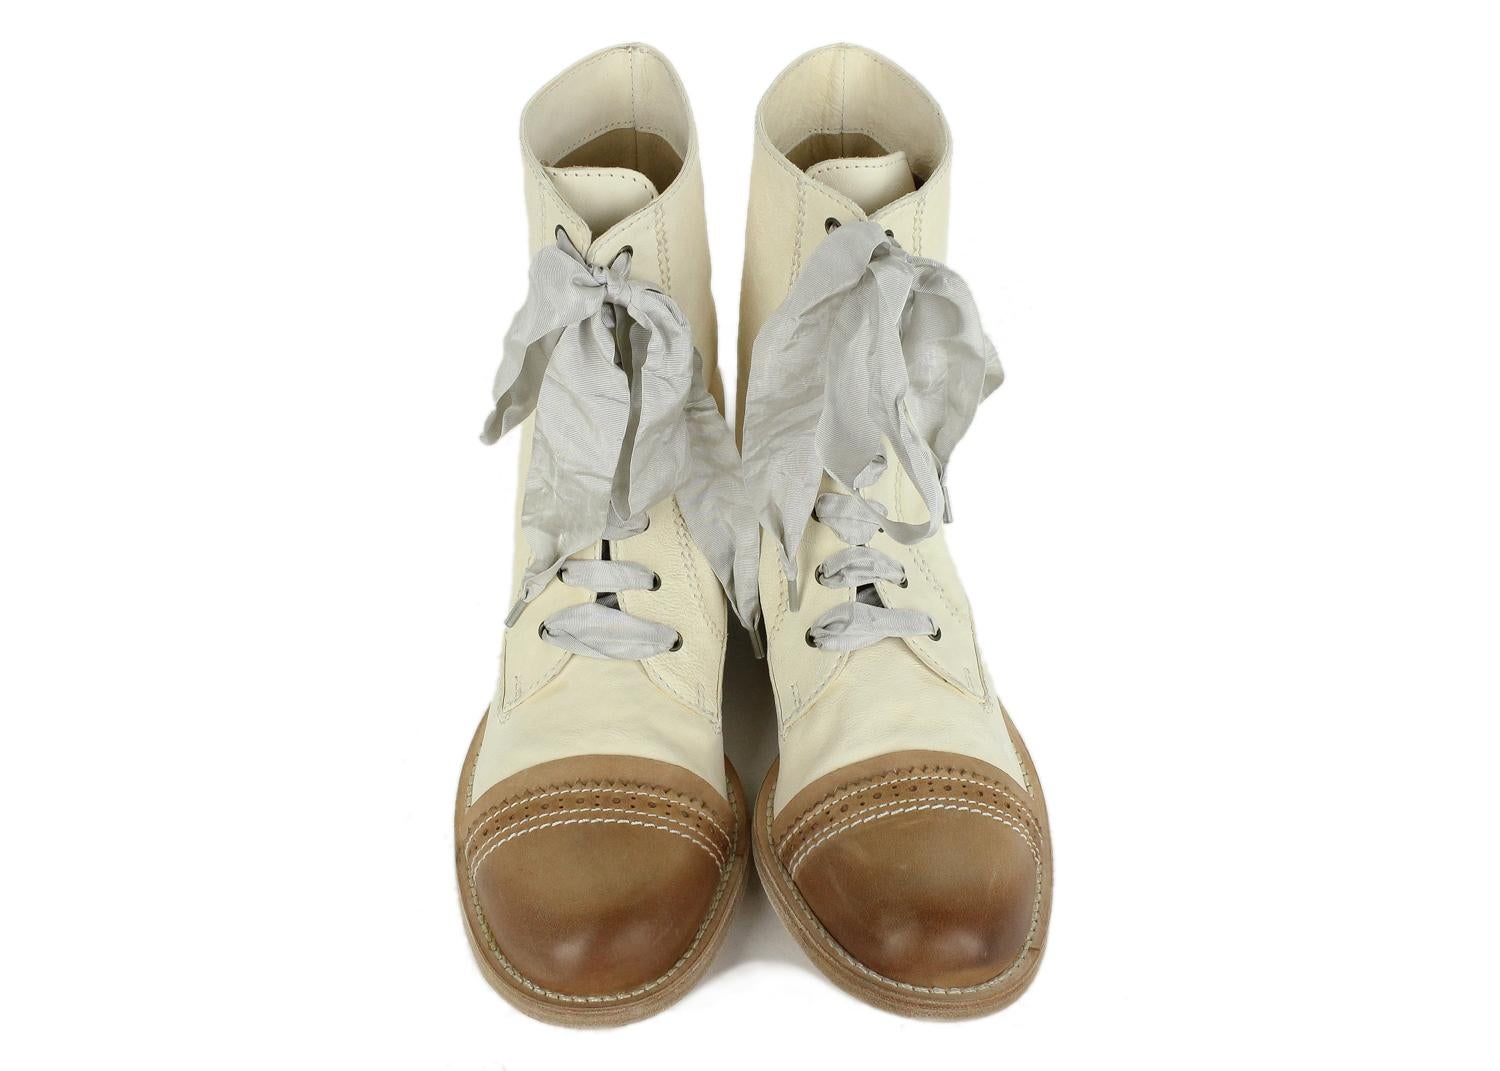 Brunello Cucinelli Ivory Brown Leather Lace Up Boots. The color contrast of ivory and brown tones give these boots personality and are nostalgic from another time. Wear these with a short floral dress for a cute 90's inspired look.

Leather
Lace Up